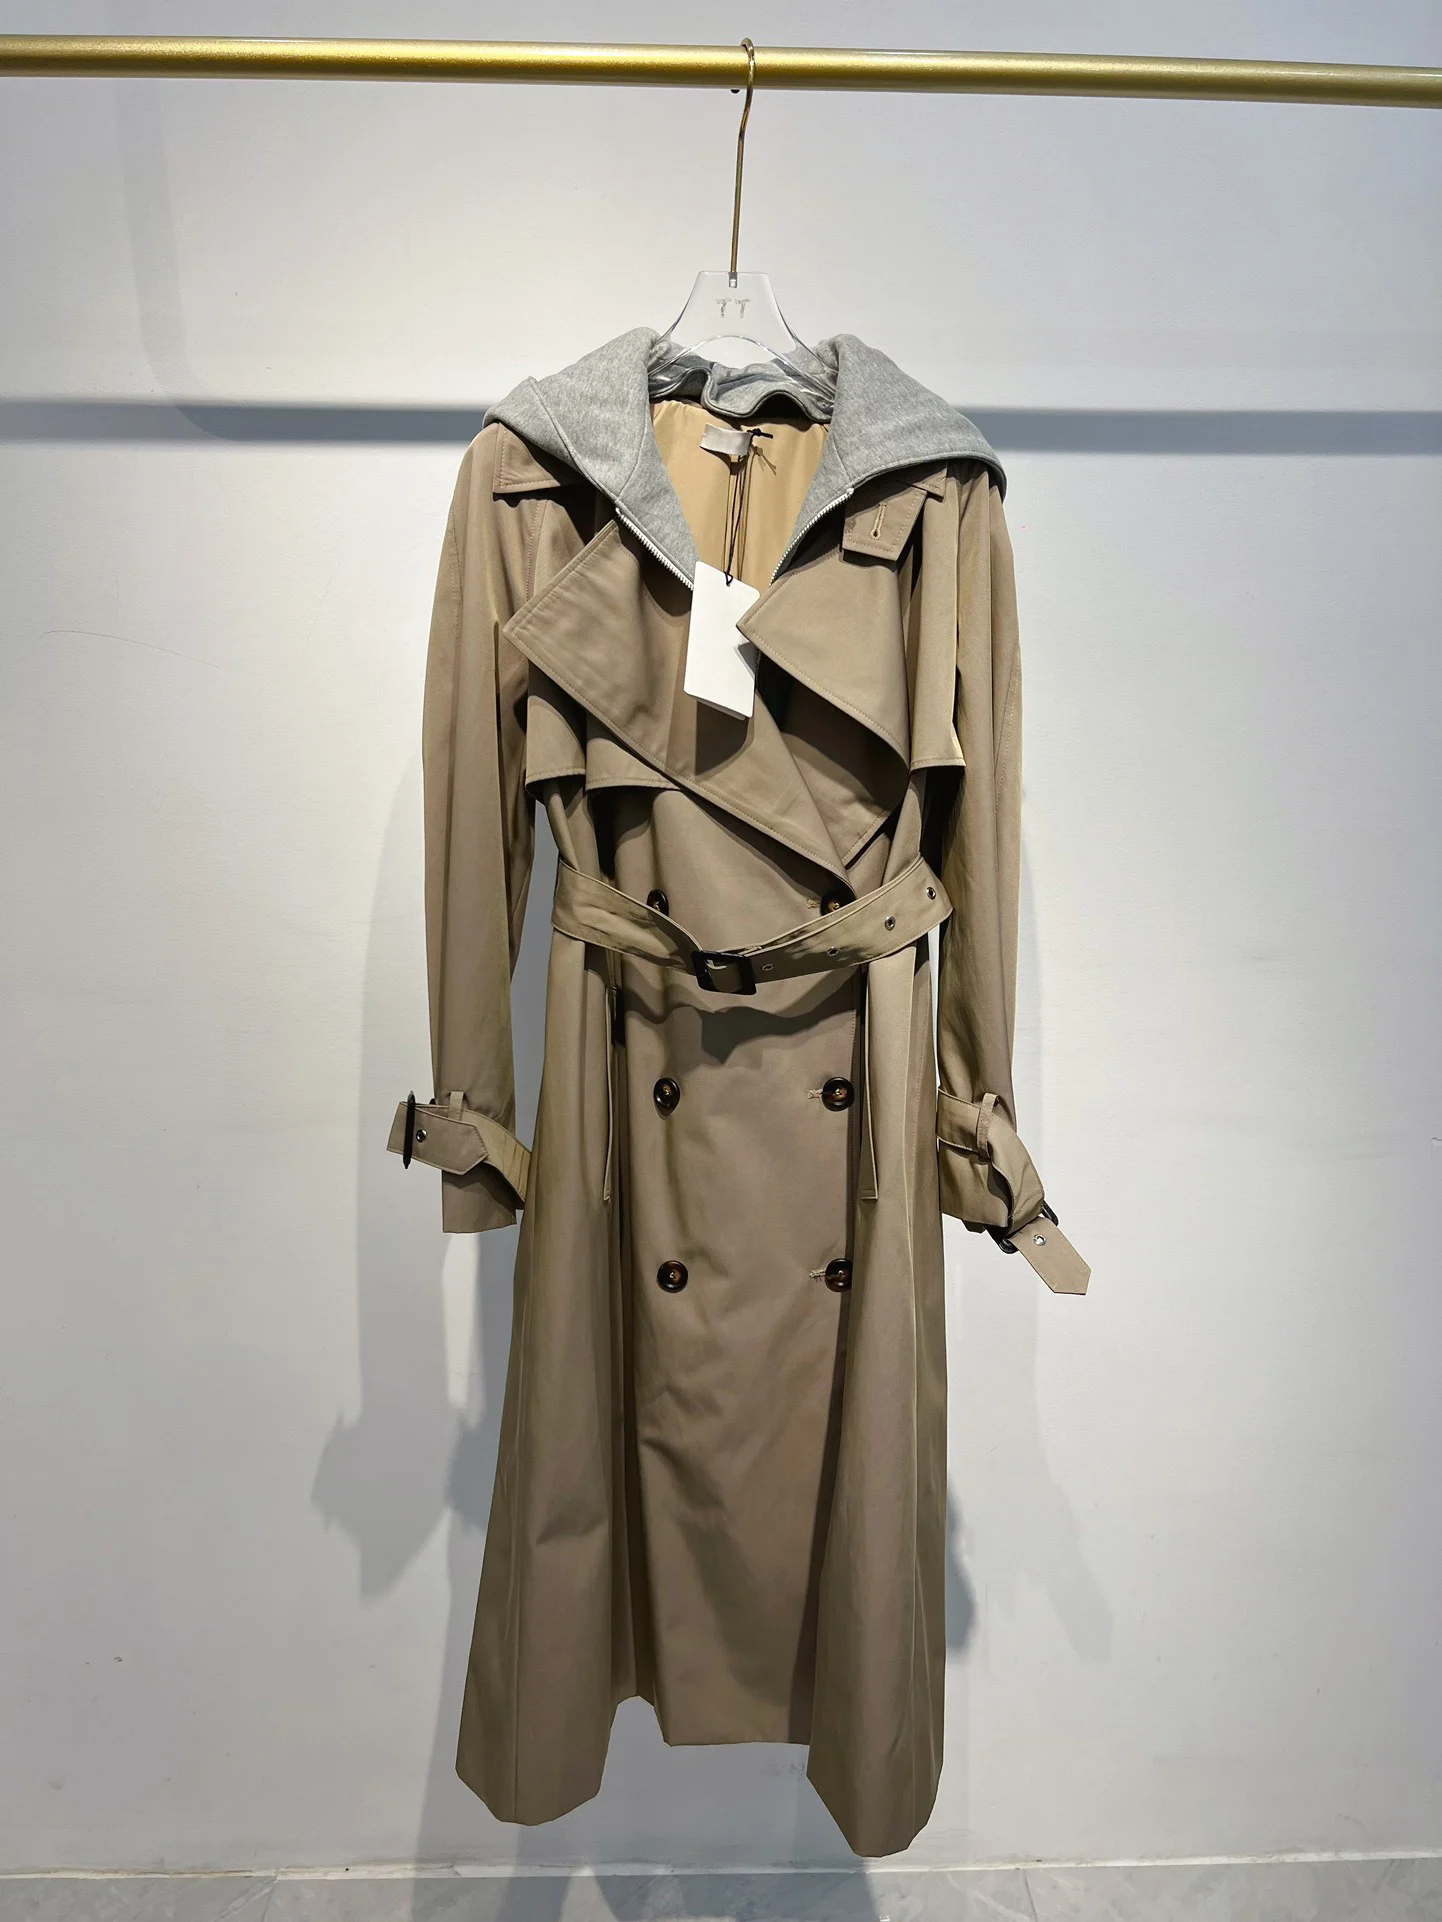 

The new silhouette trench coat for early fall is full of chic blogger English style double-breasted designs